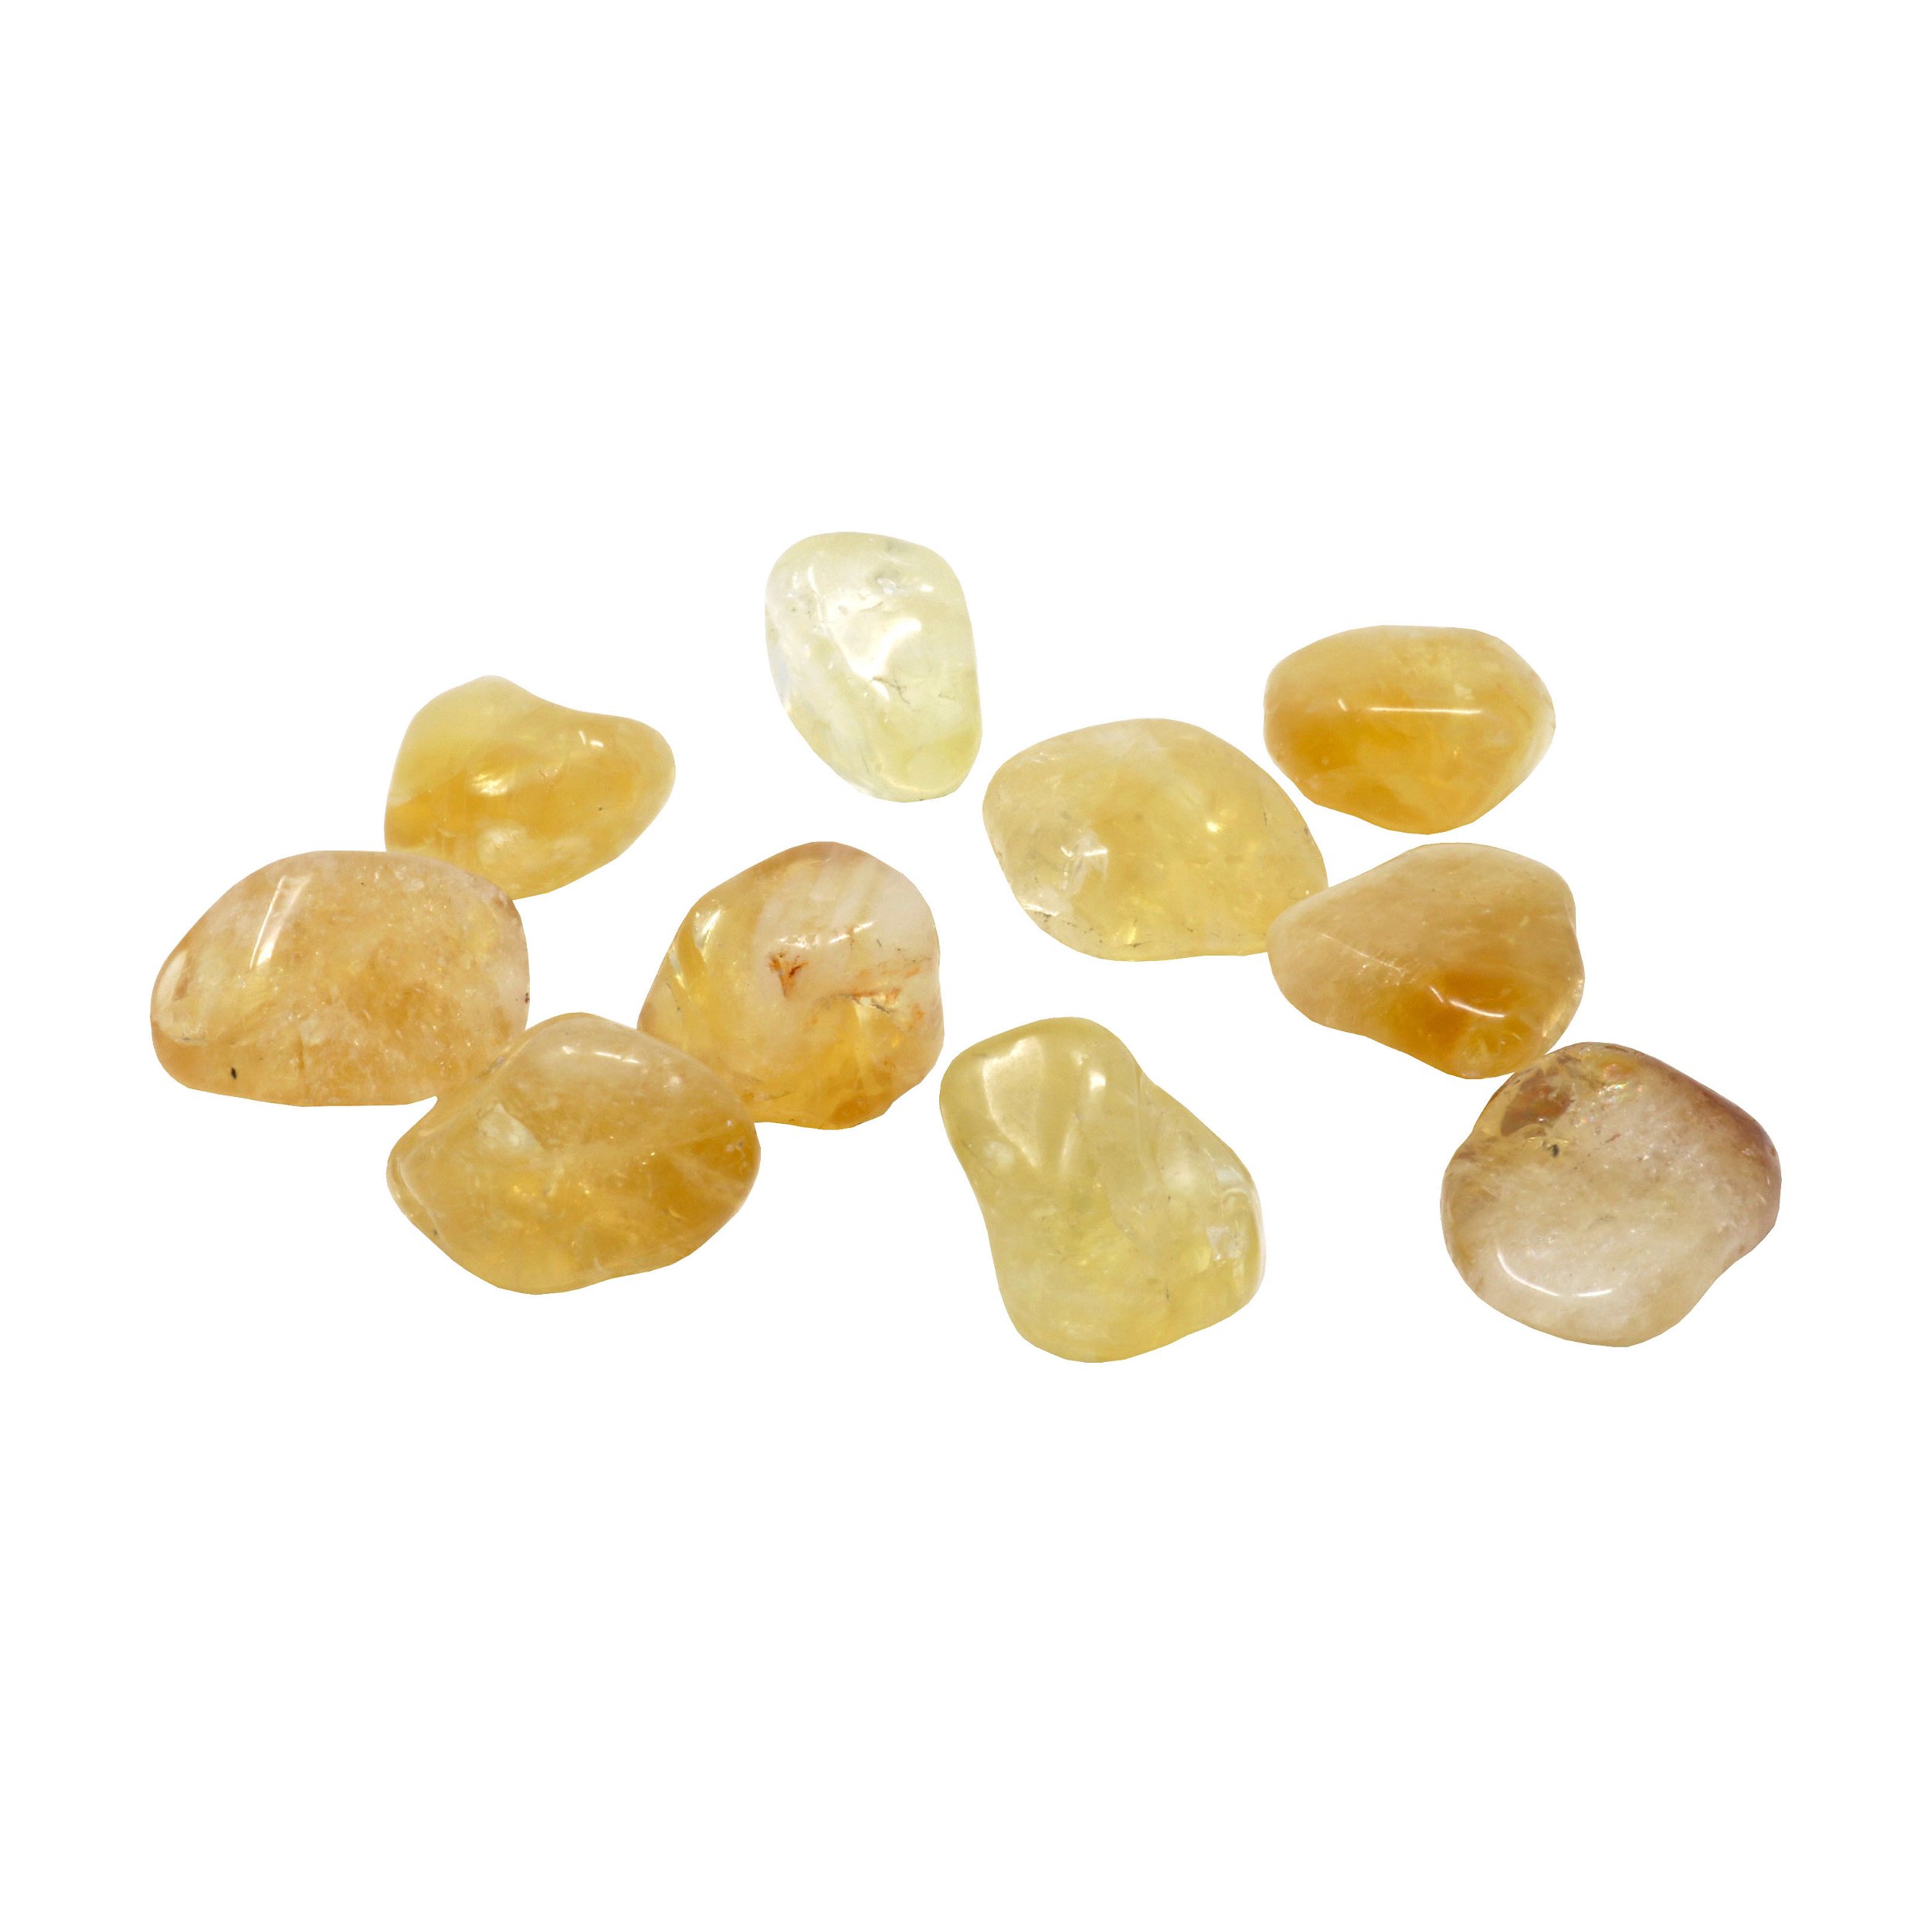 Tumbled Citrine A+ Quality - Small (Singles)